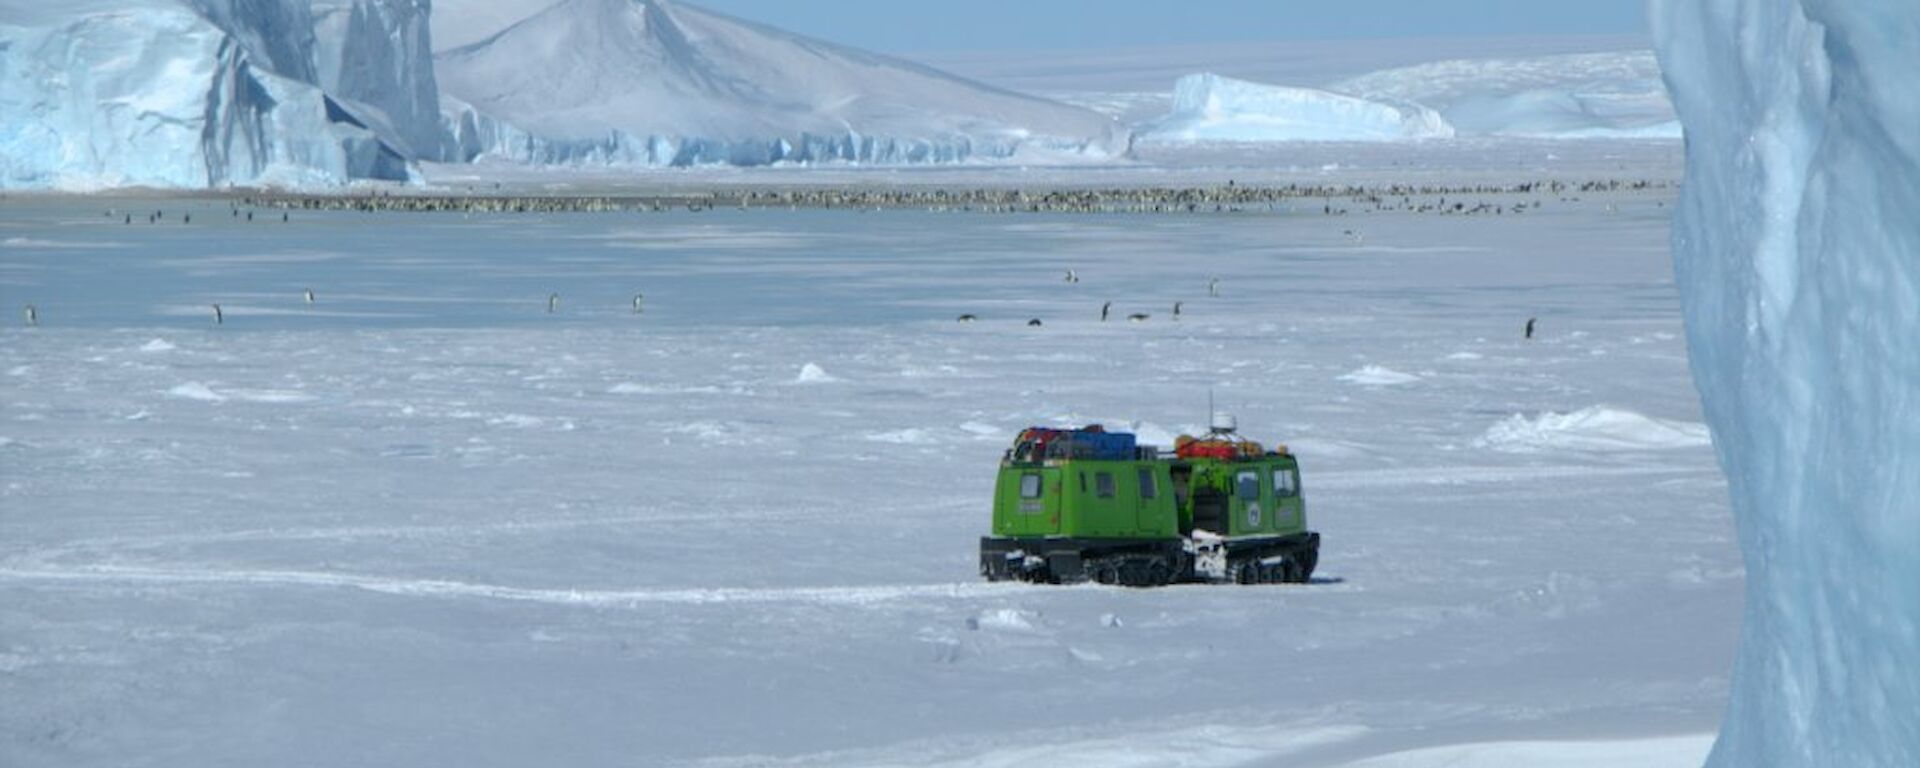 The Auster emperor penguin colony on sea ice surrounded by gigantic icebergs with the ice plateau in the background and a green Hägglunds all terrain vehicle in the foreground